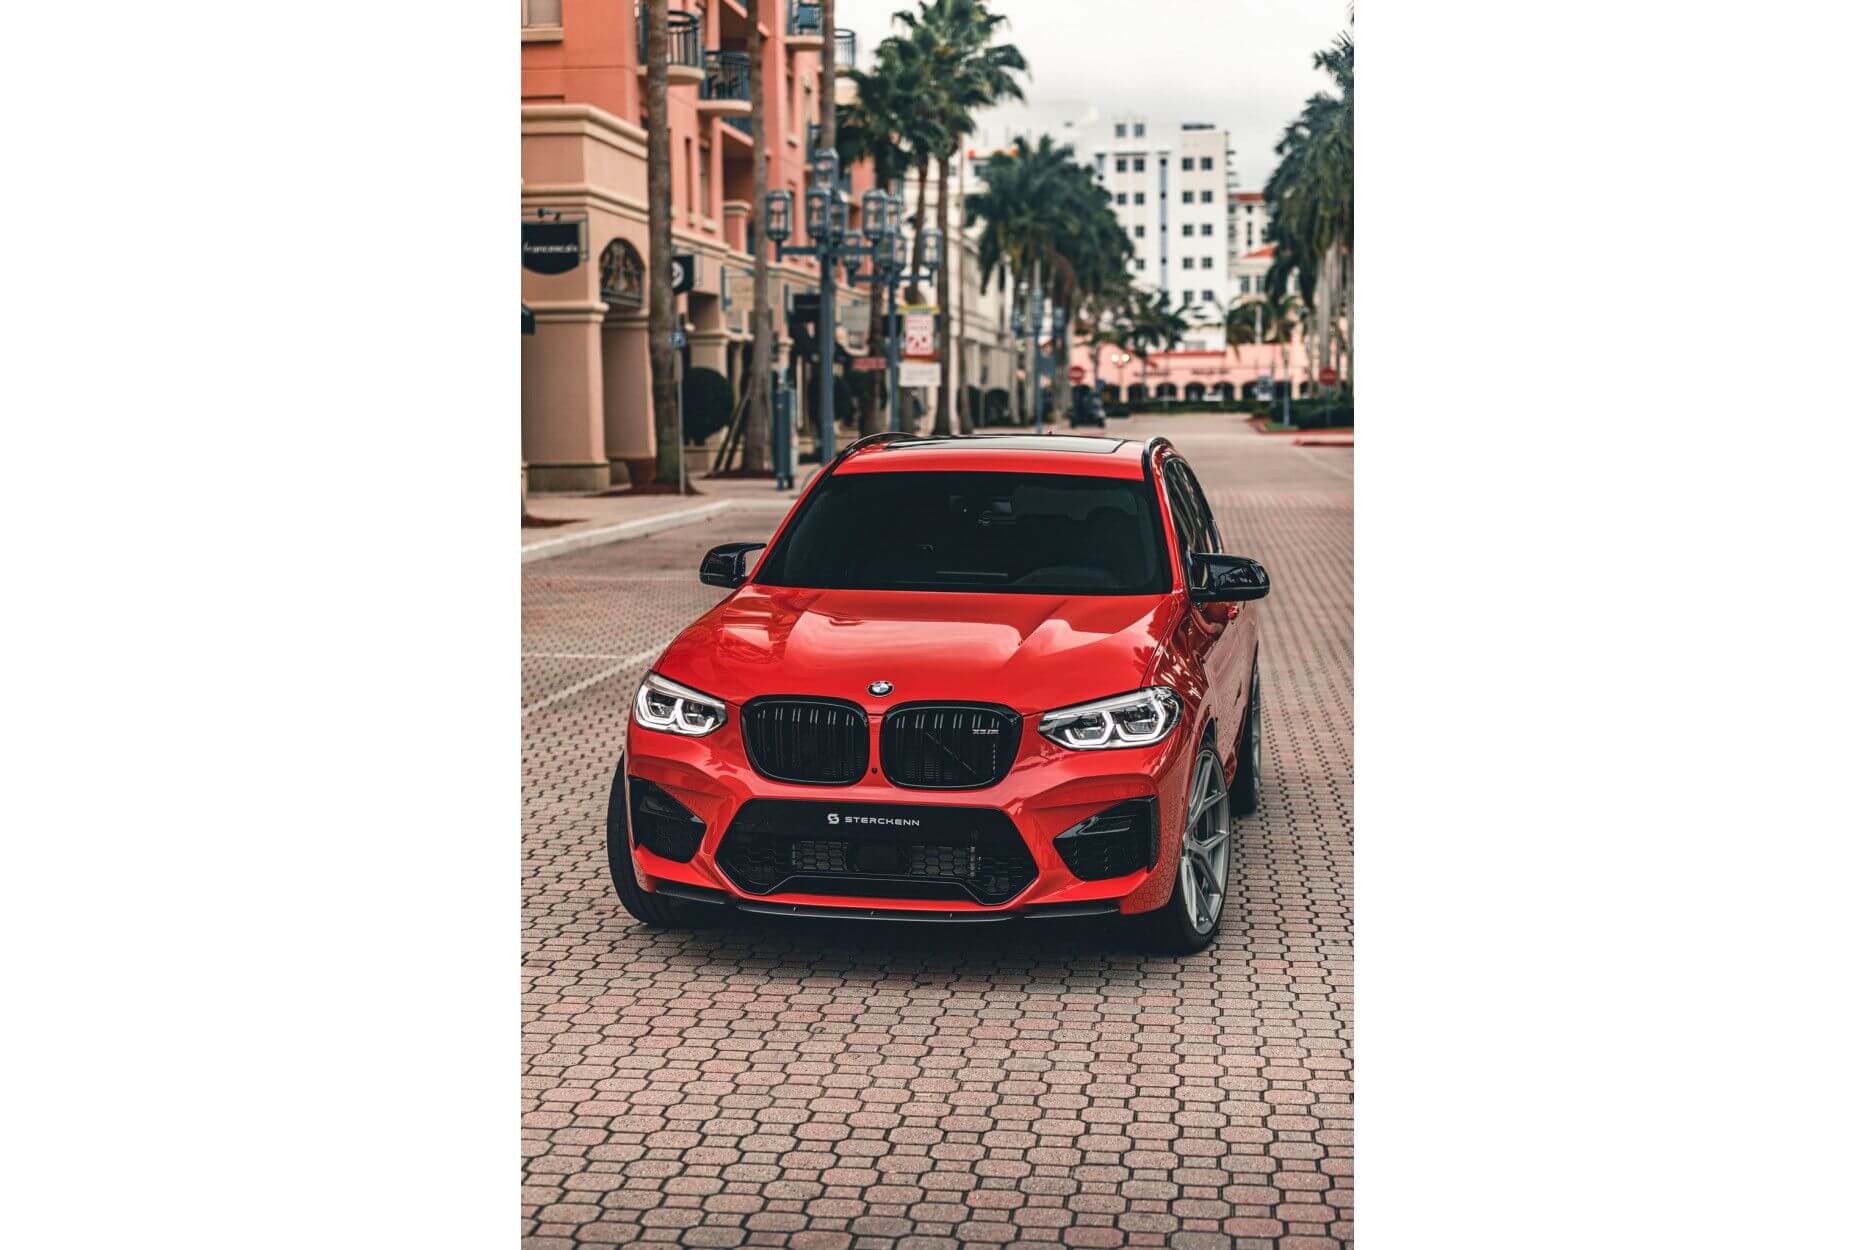 Sterckenn | Carbon Frontlippe | BMW X3M/X4M Competition (F97/F98) 510PS S58